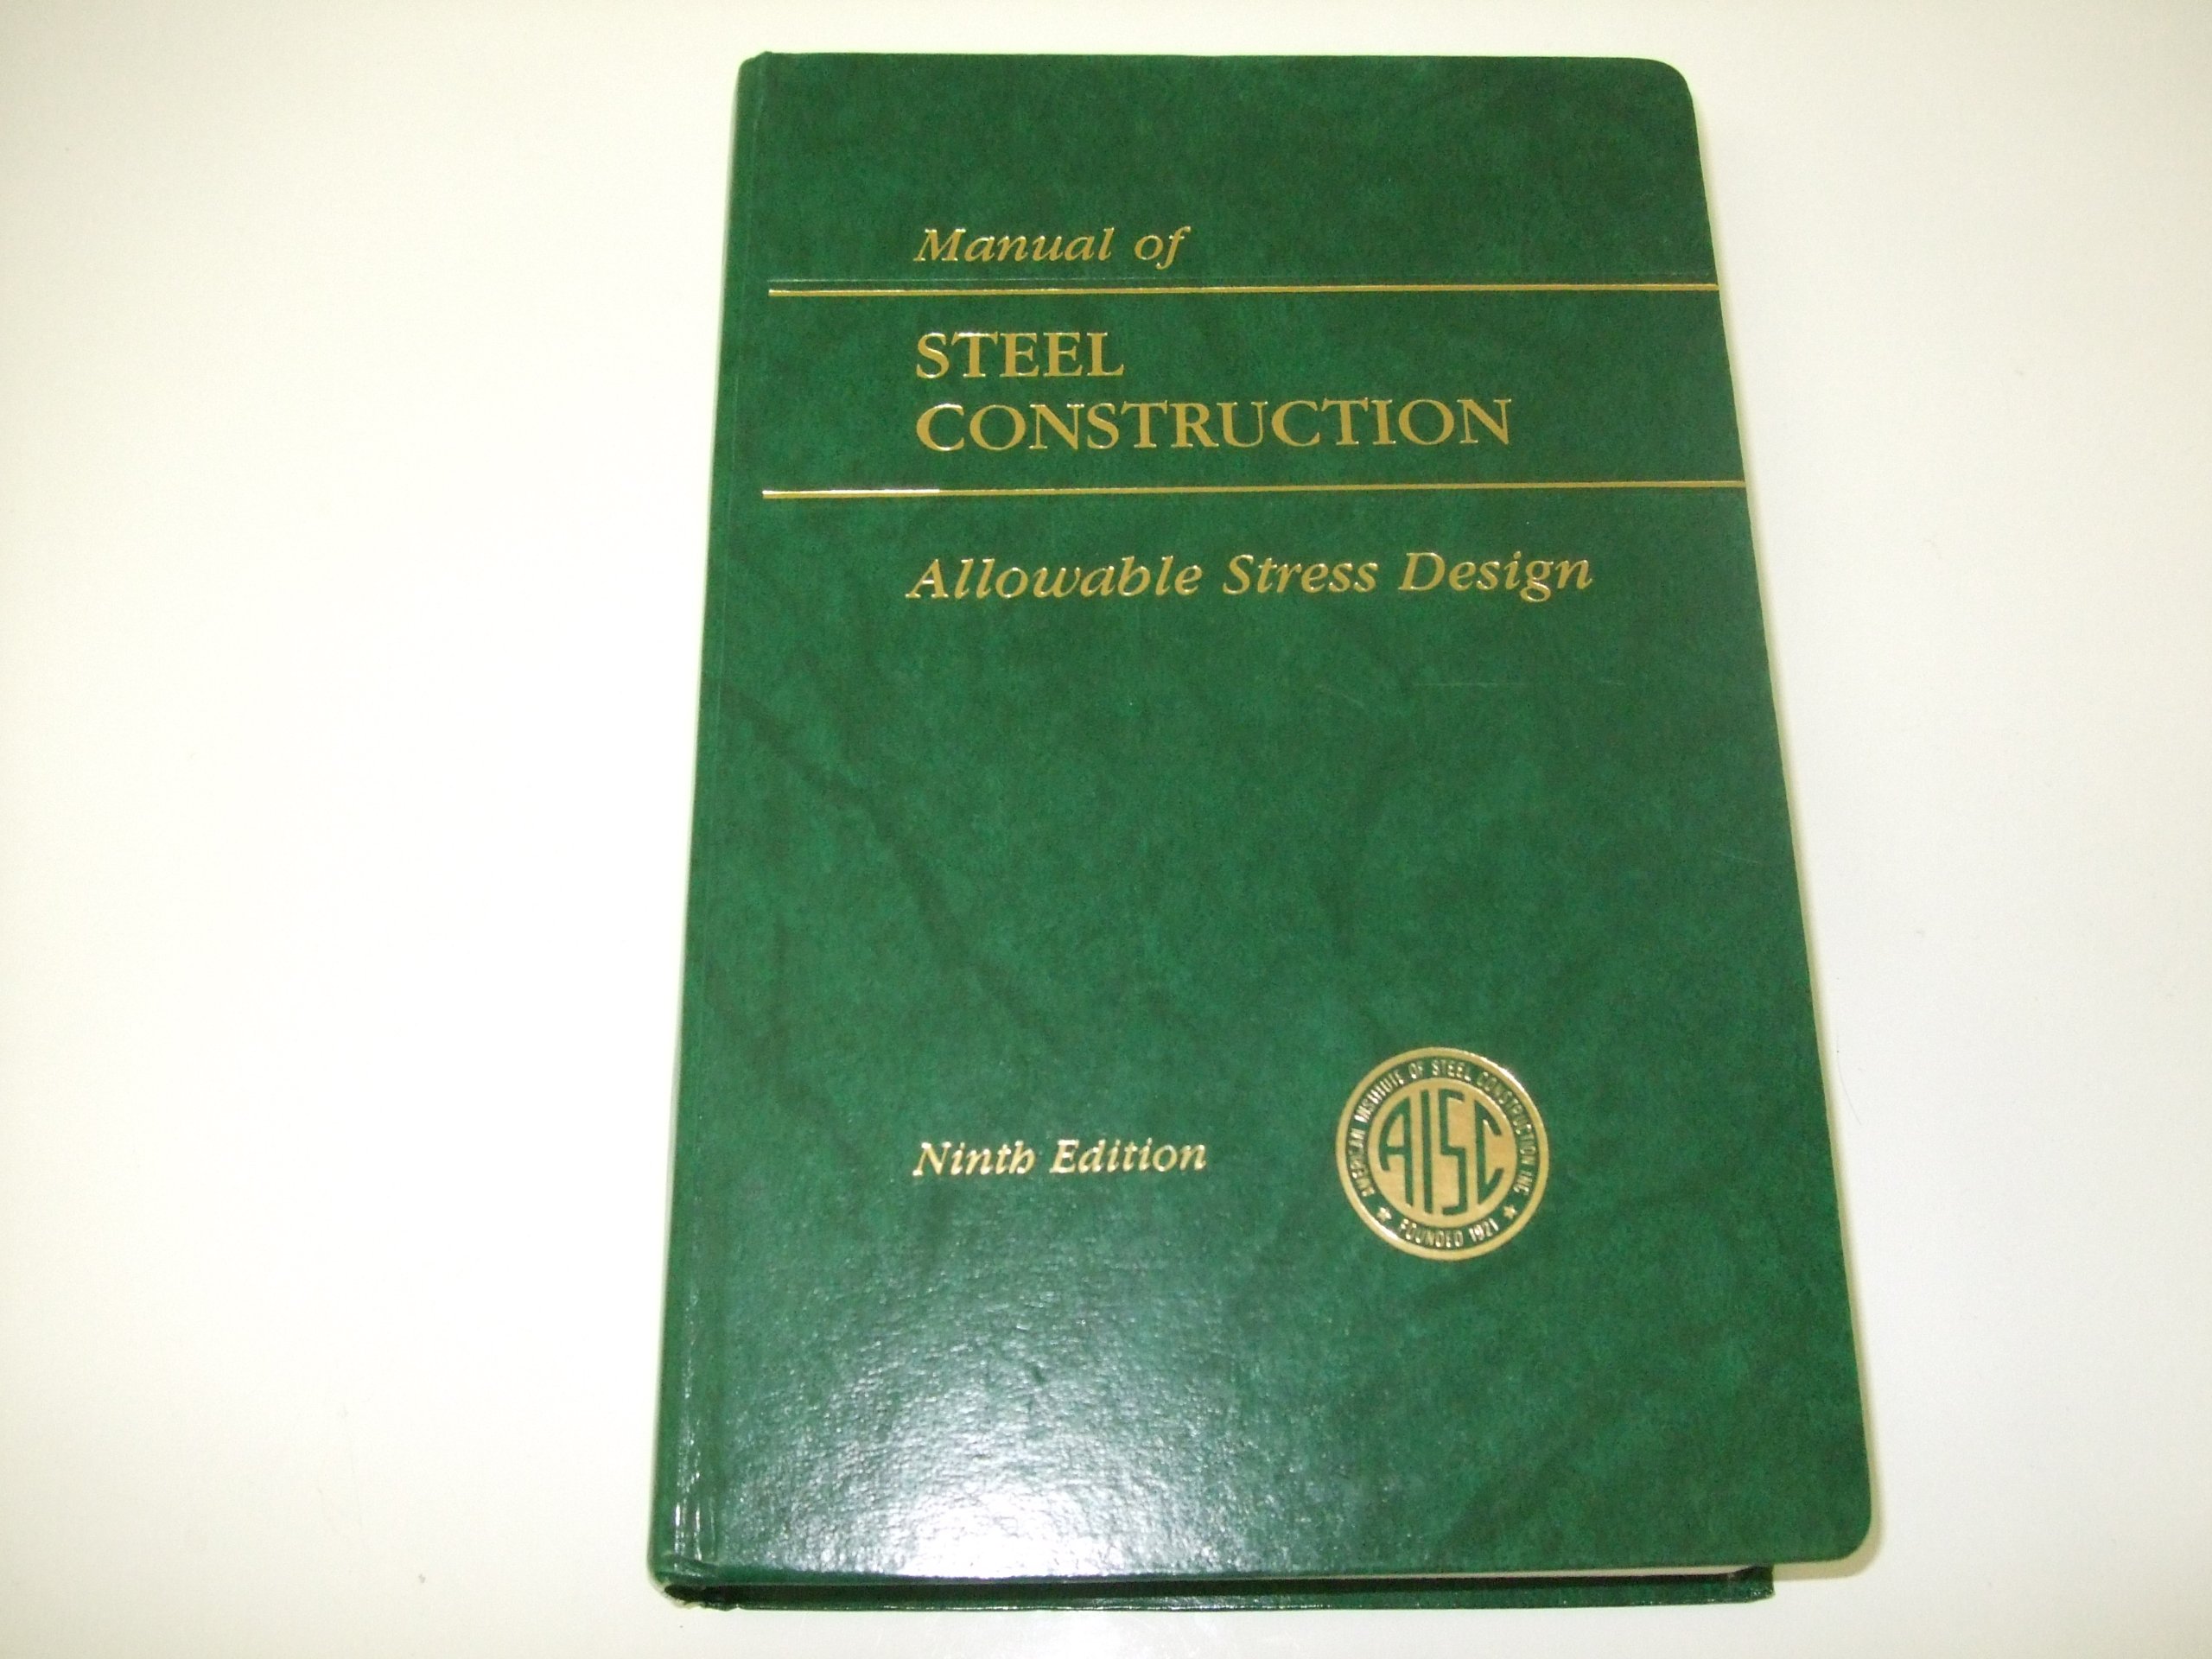 AISC Manual of Steel Construction: Allowable Stress Design (AISC 316-89) by AISC Manual Committee Published by Amer Inst of Steel Construction 9th ...